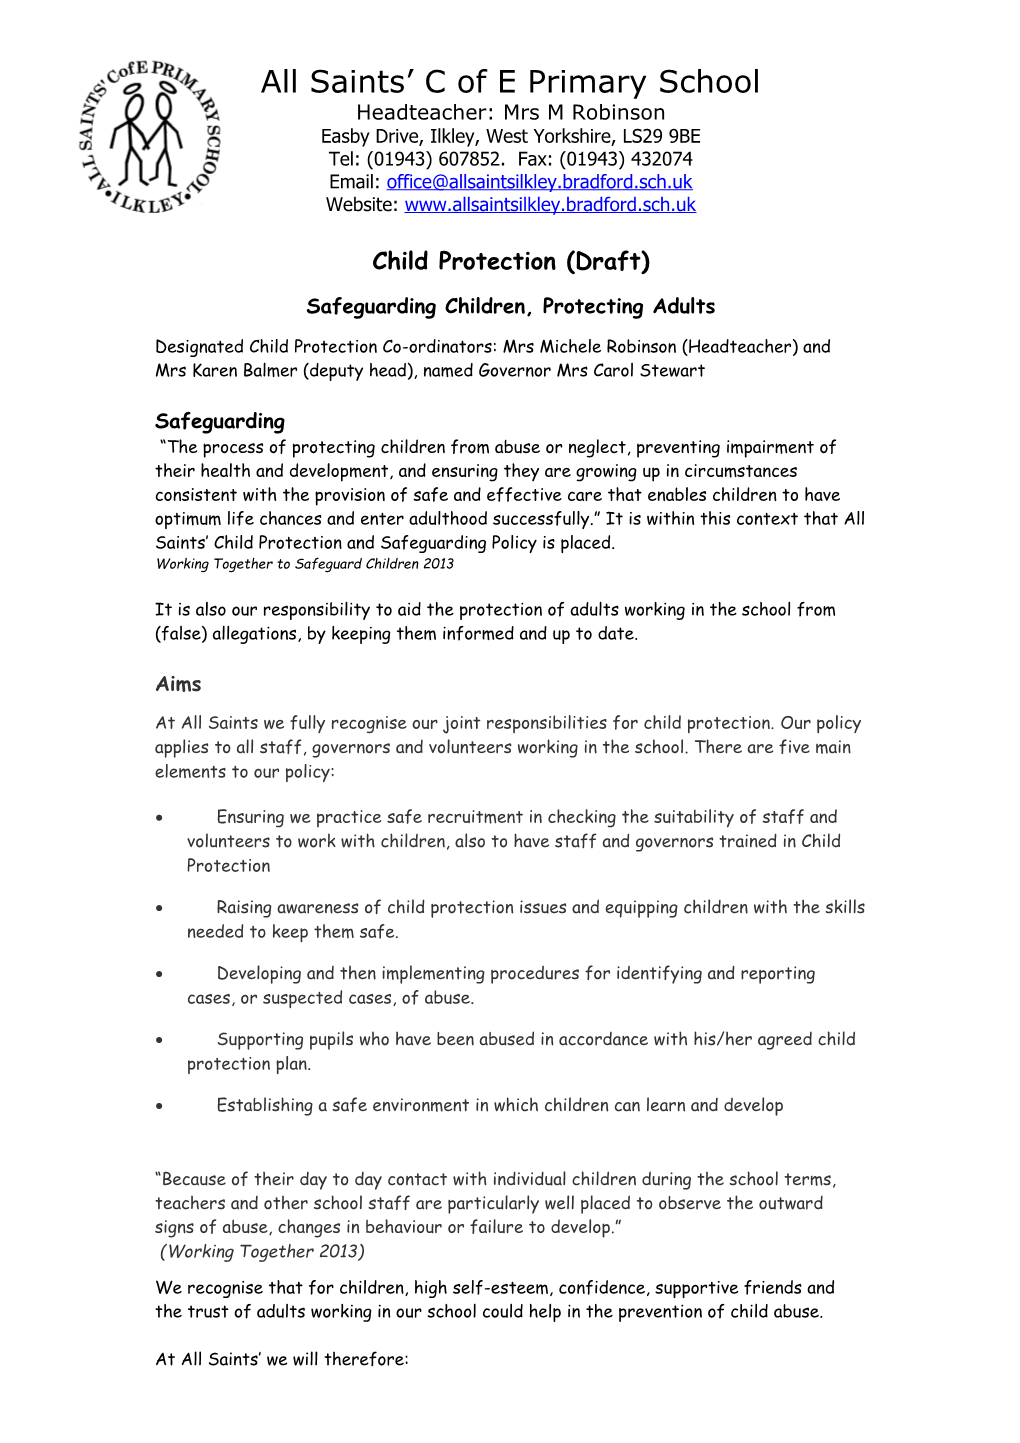 Child Proection Policy